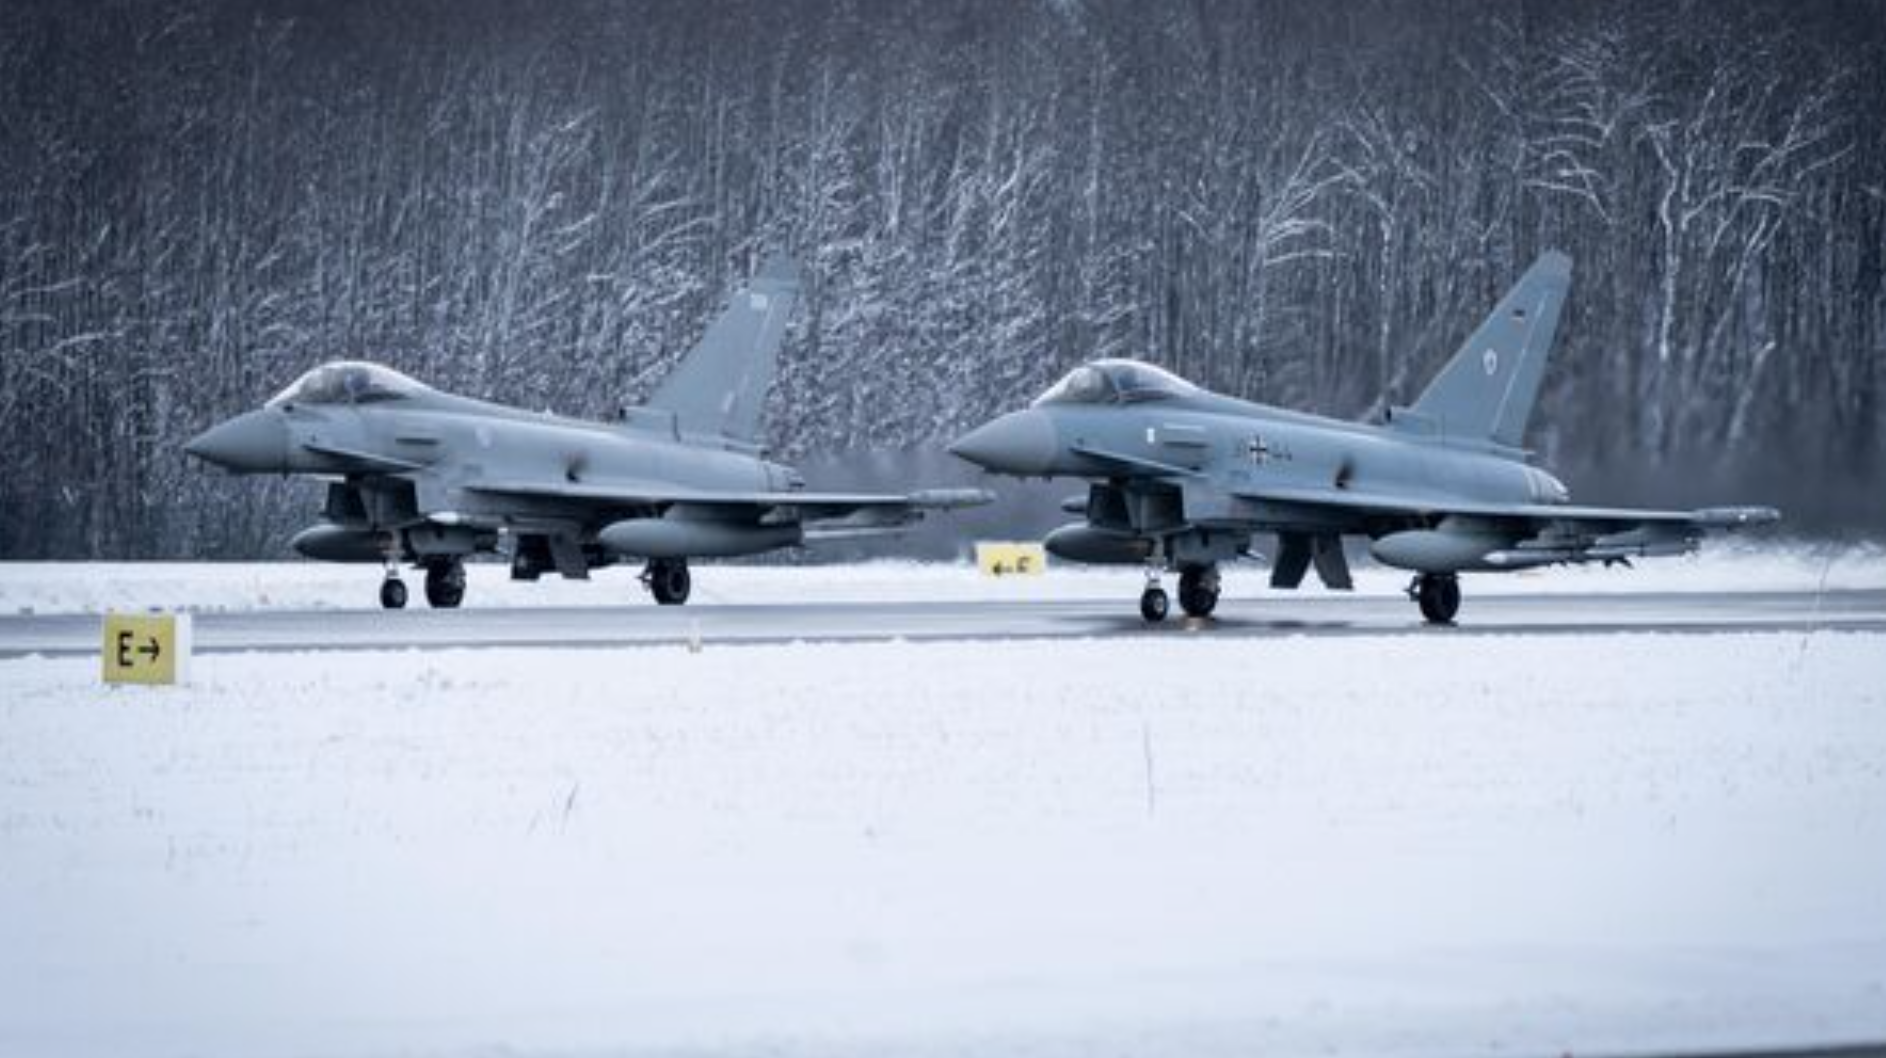 UK and German Eurofighters Intercept First Russian Aircraft in Joint Baltic Air Policing Mission